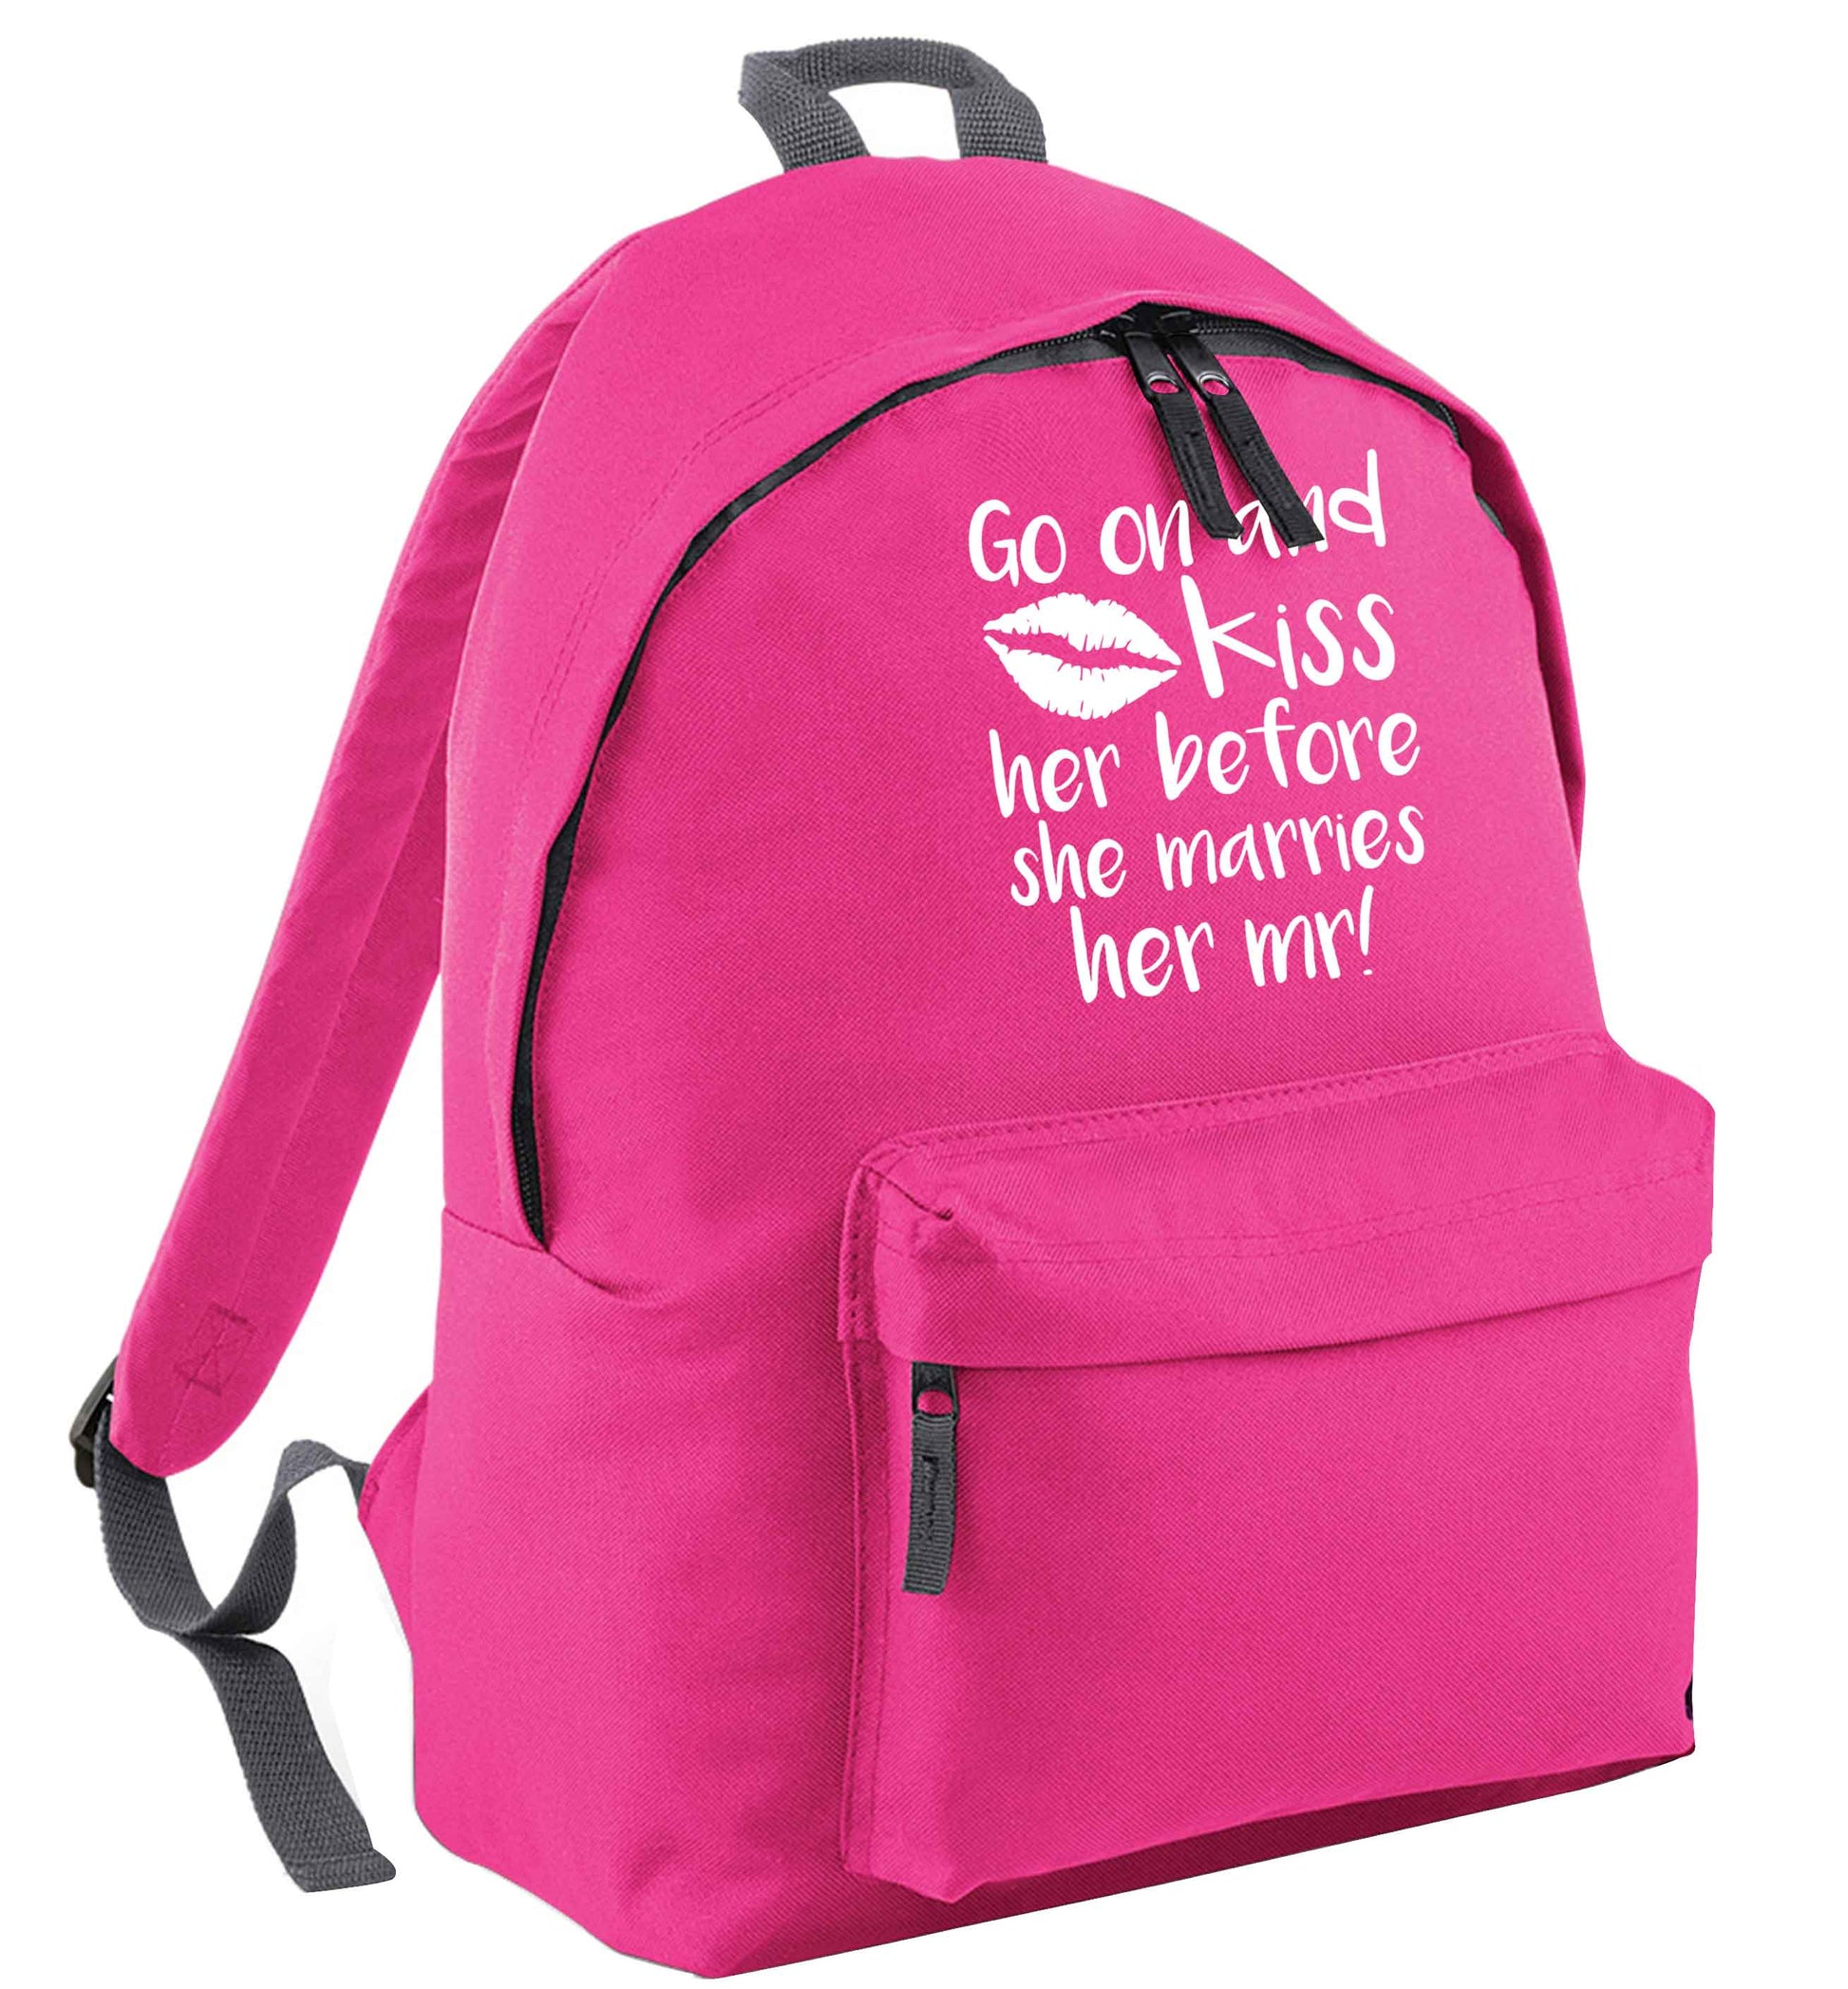 Kiss her before she marries her mr! pink adults backpack